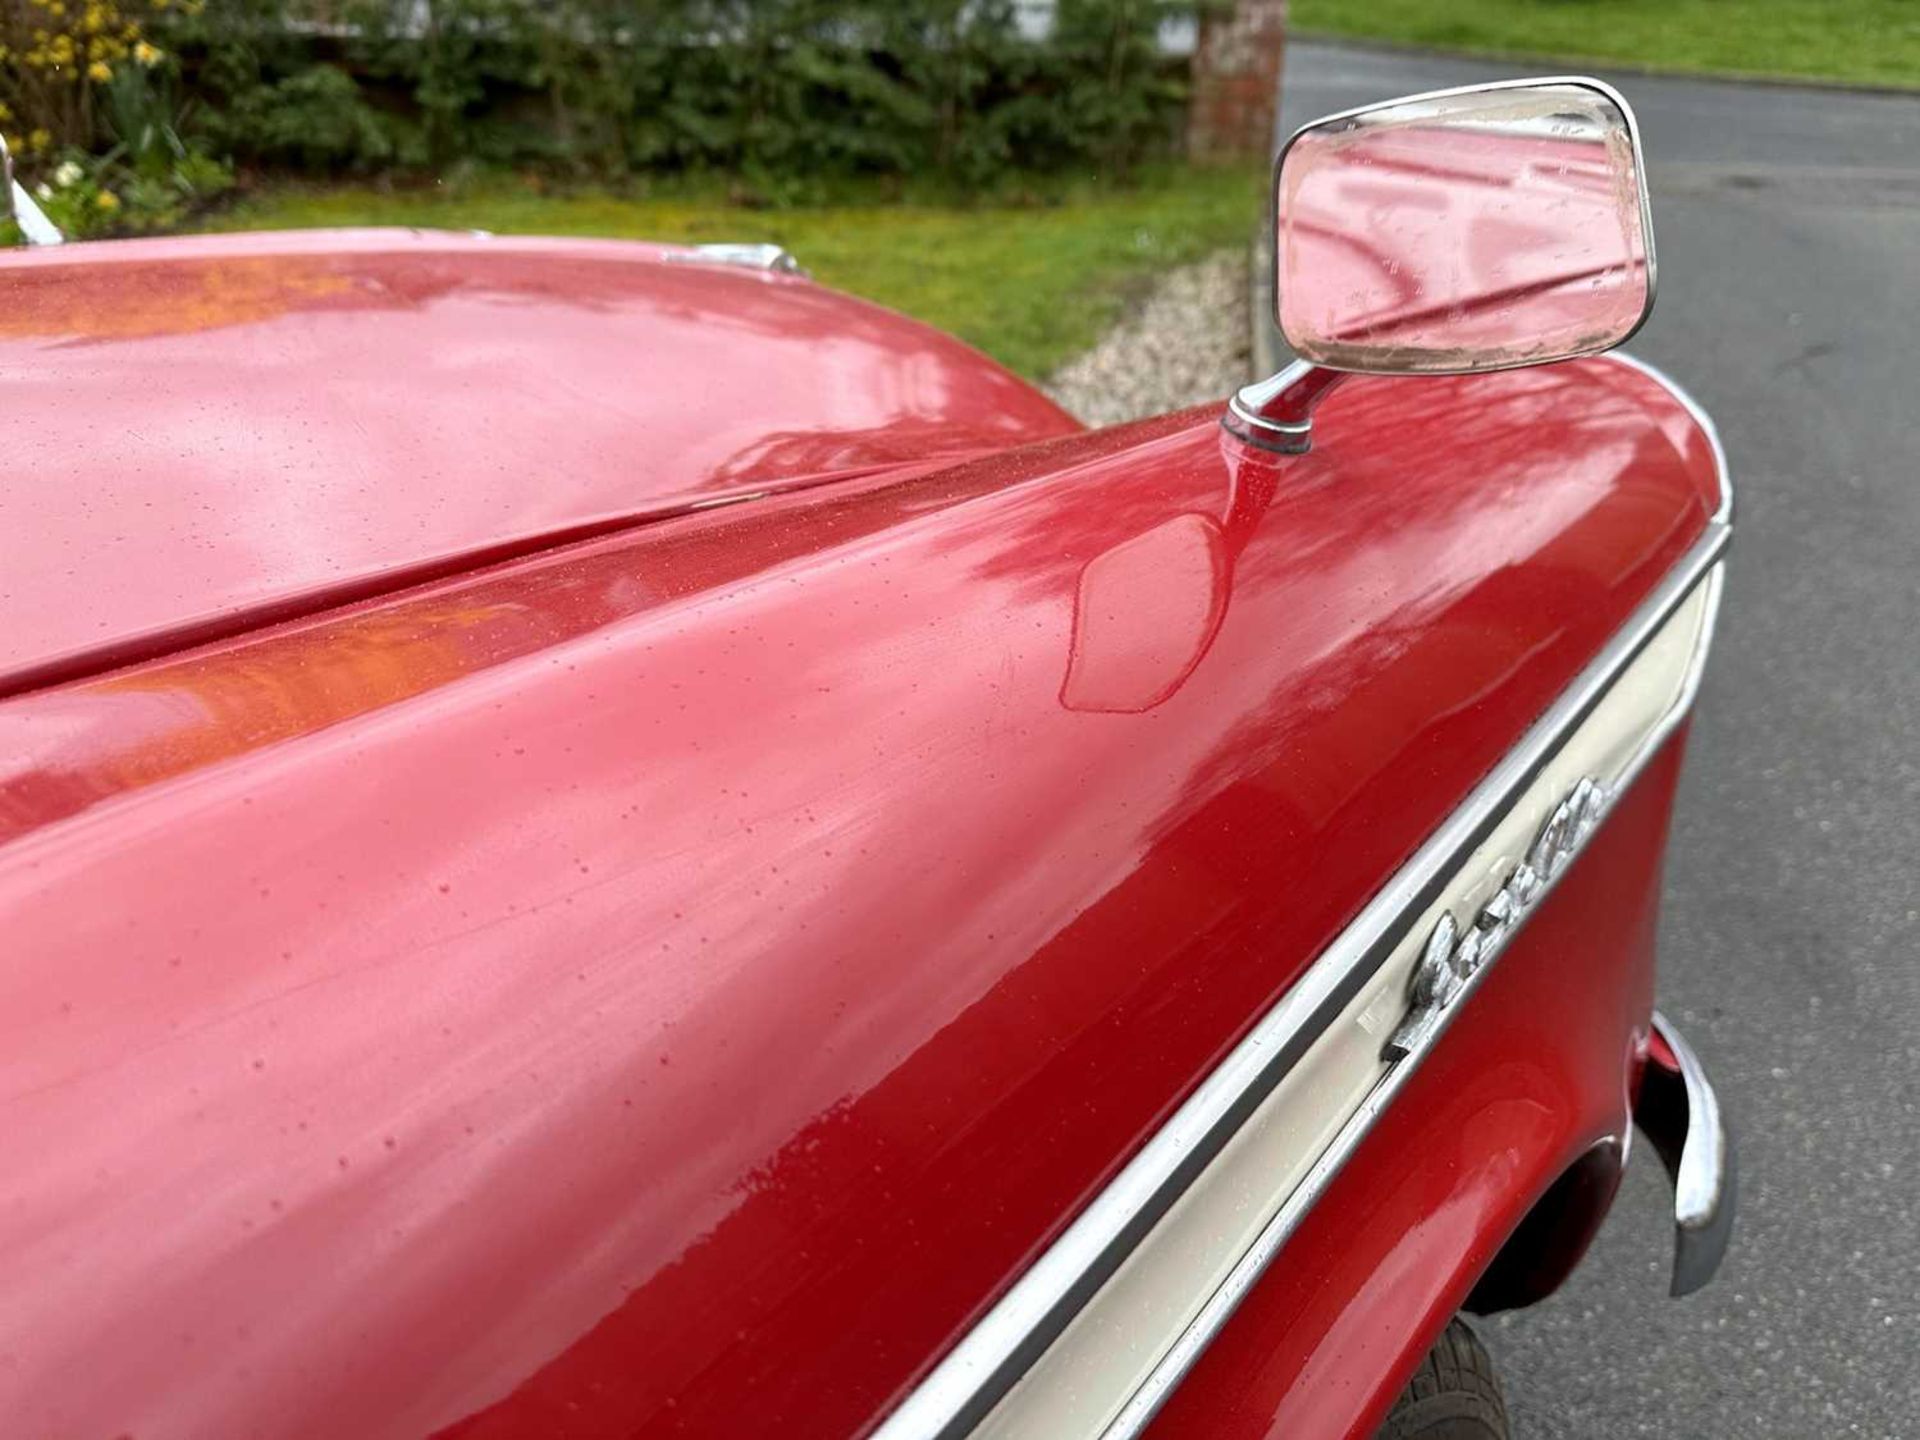 1961 Singer Gazelle Convertible Comes complete with overdrive, period radio and badge bar - Image 70 of 95